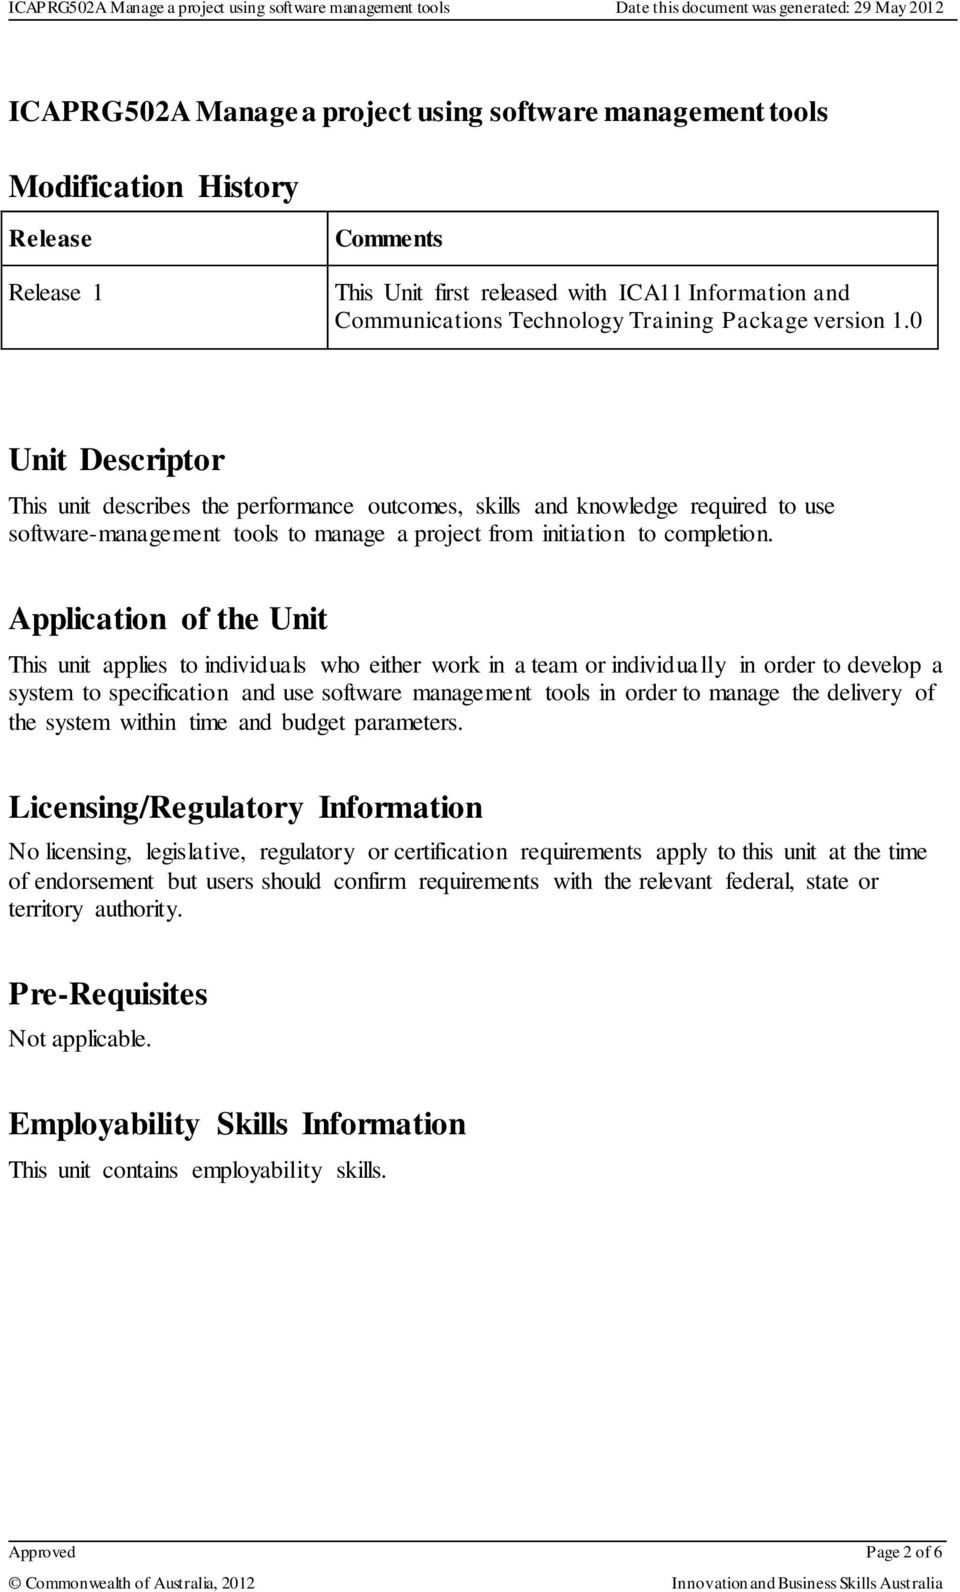 Application of the Unit This unit applies to individuals who either work in a team or individually in order to develop a system to specification and use software management tools in order to manage